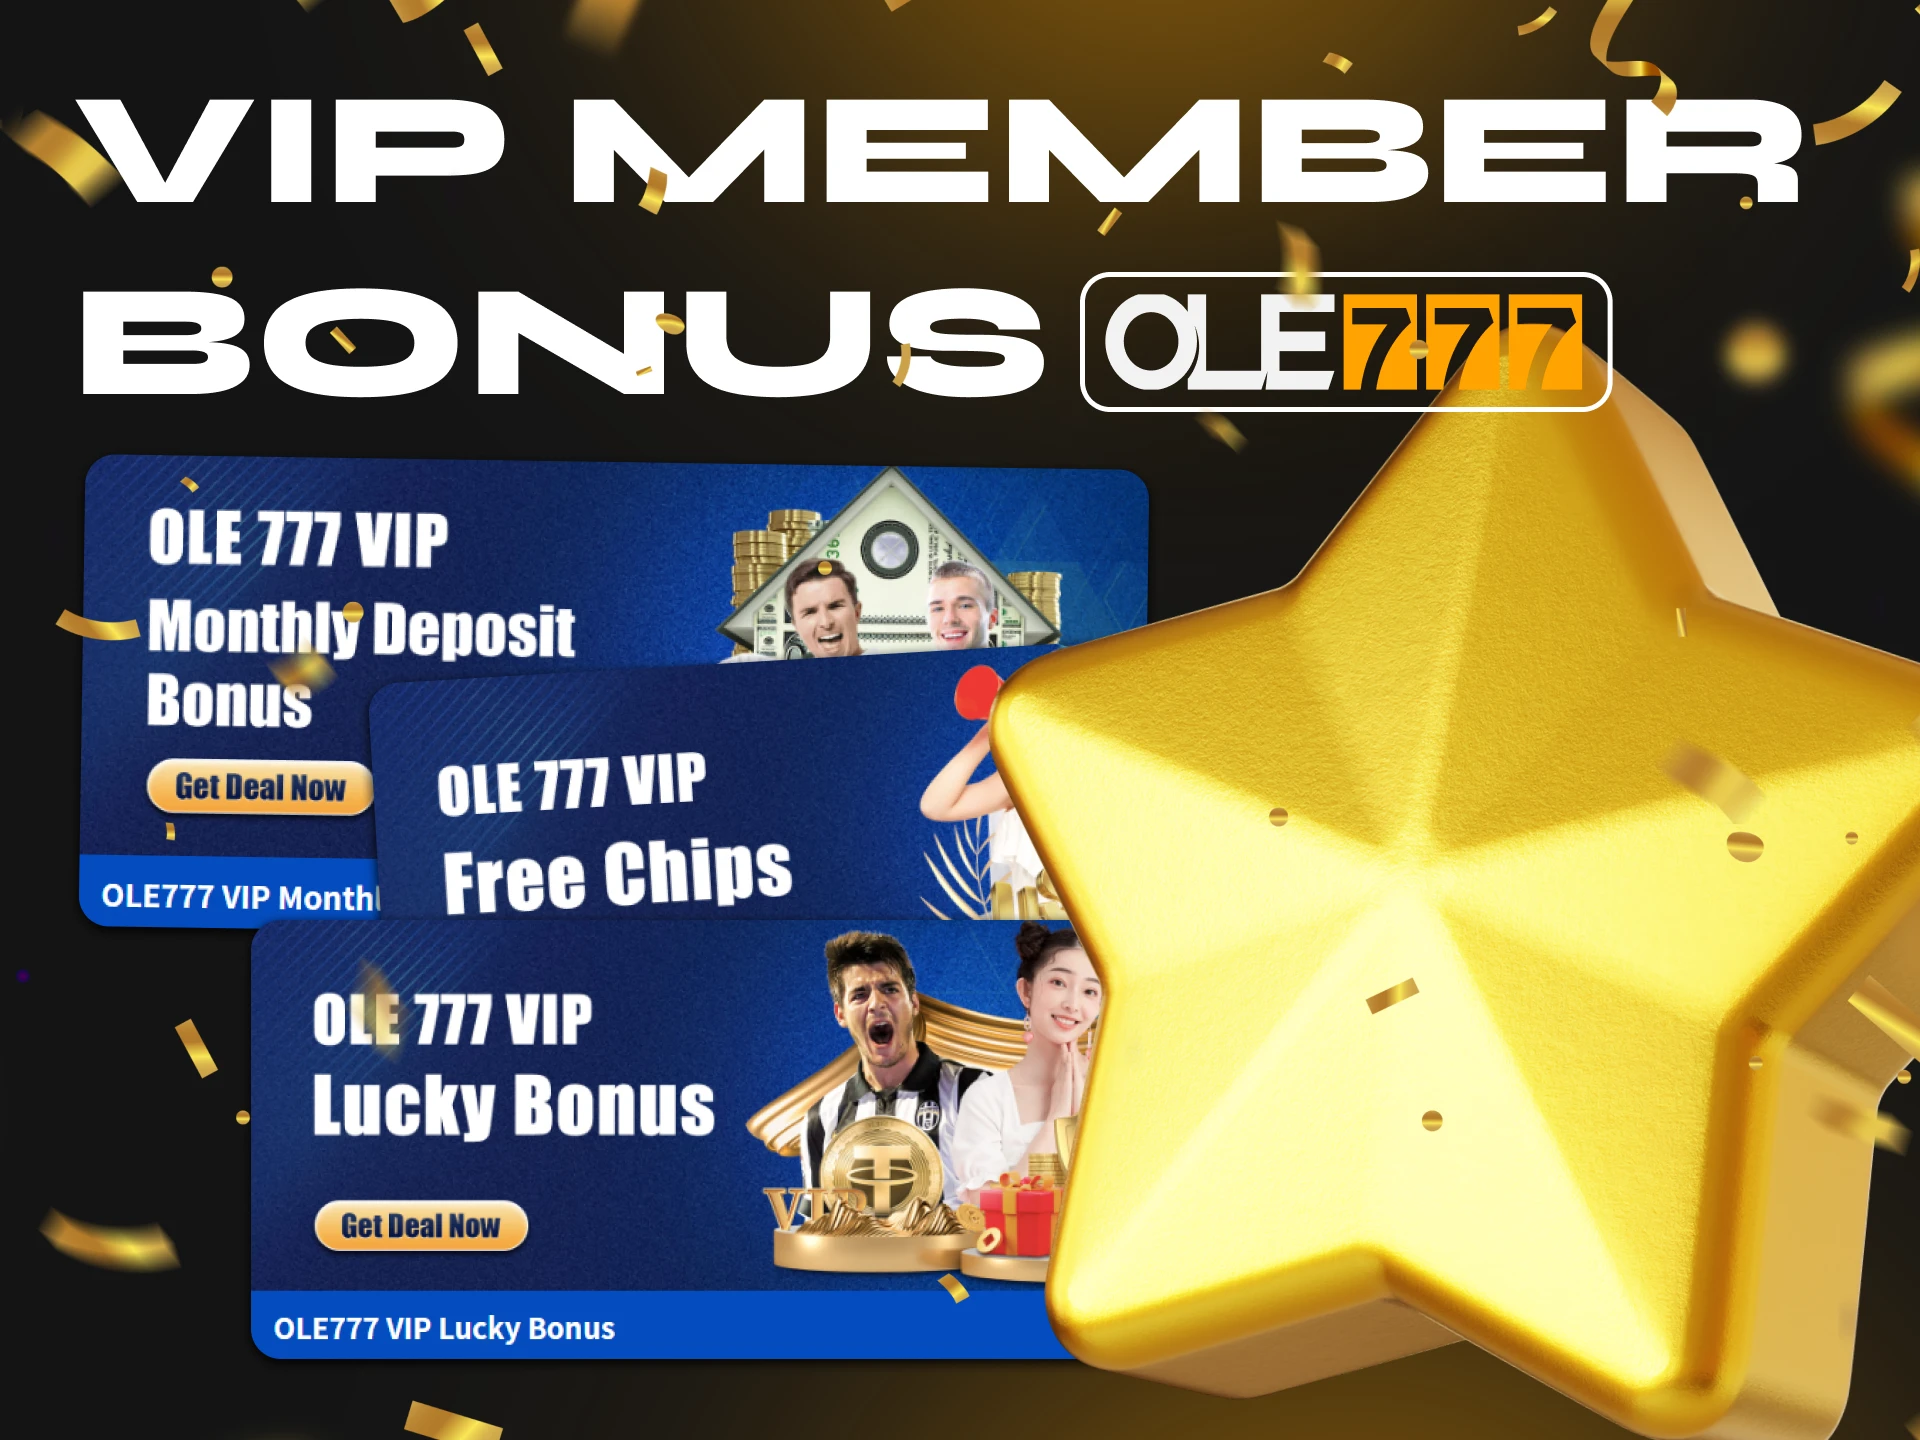 At Ole777 Casino you can get great VIP bonuses on deposits, free chips, etc.